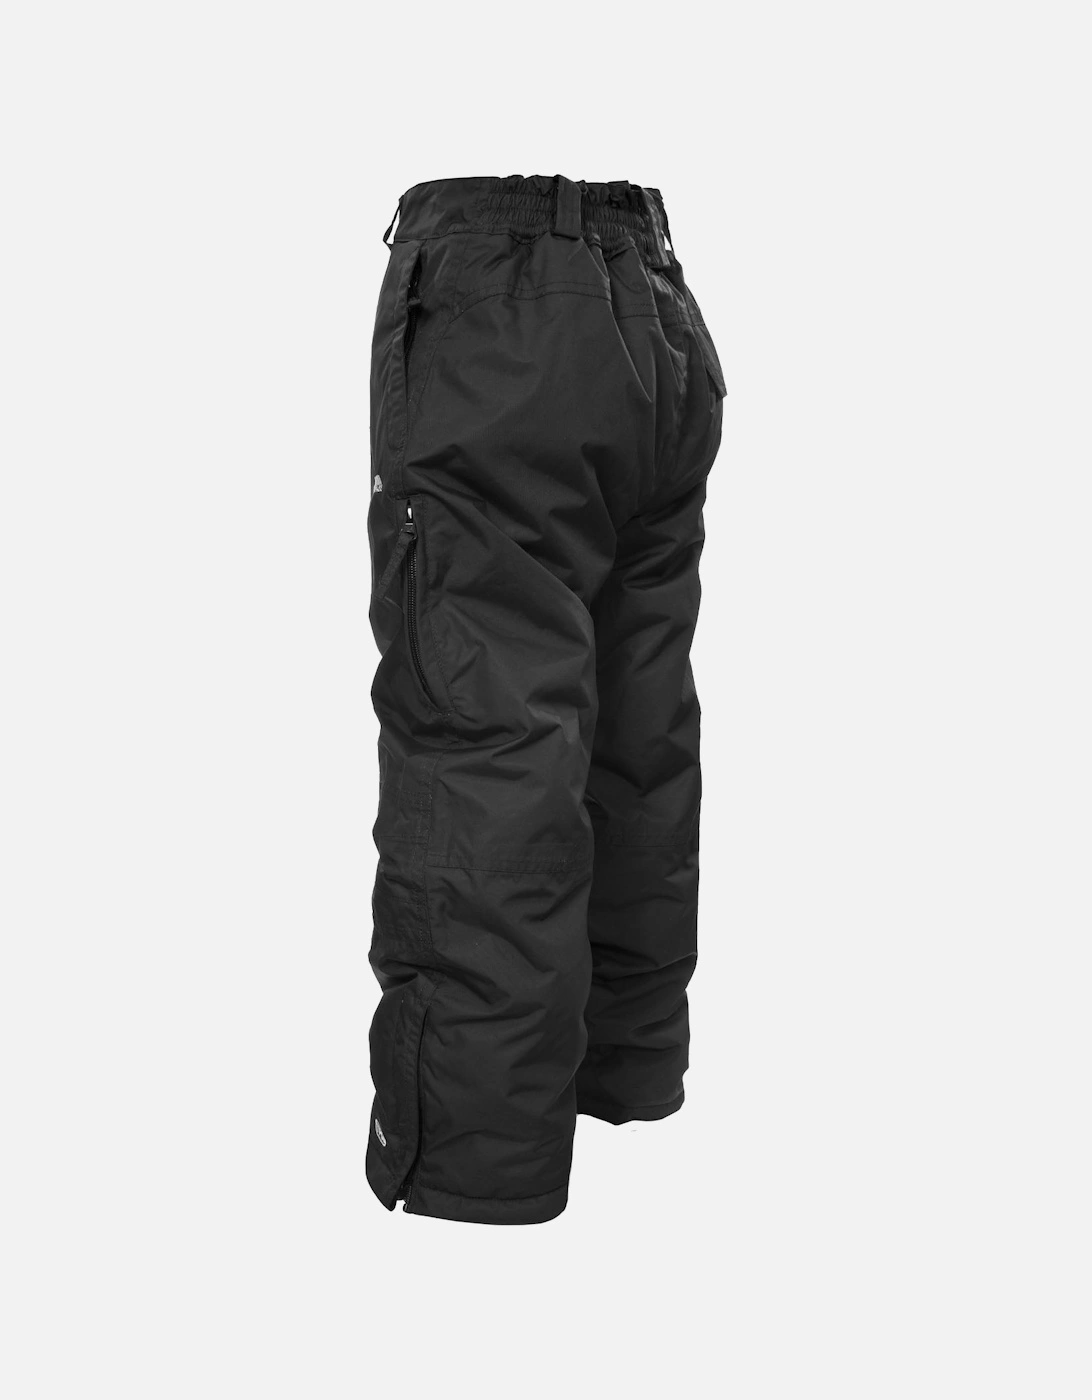 Kids Marvelous Insulated Ski Trousers